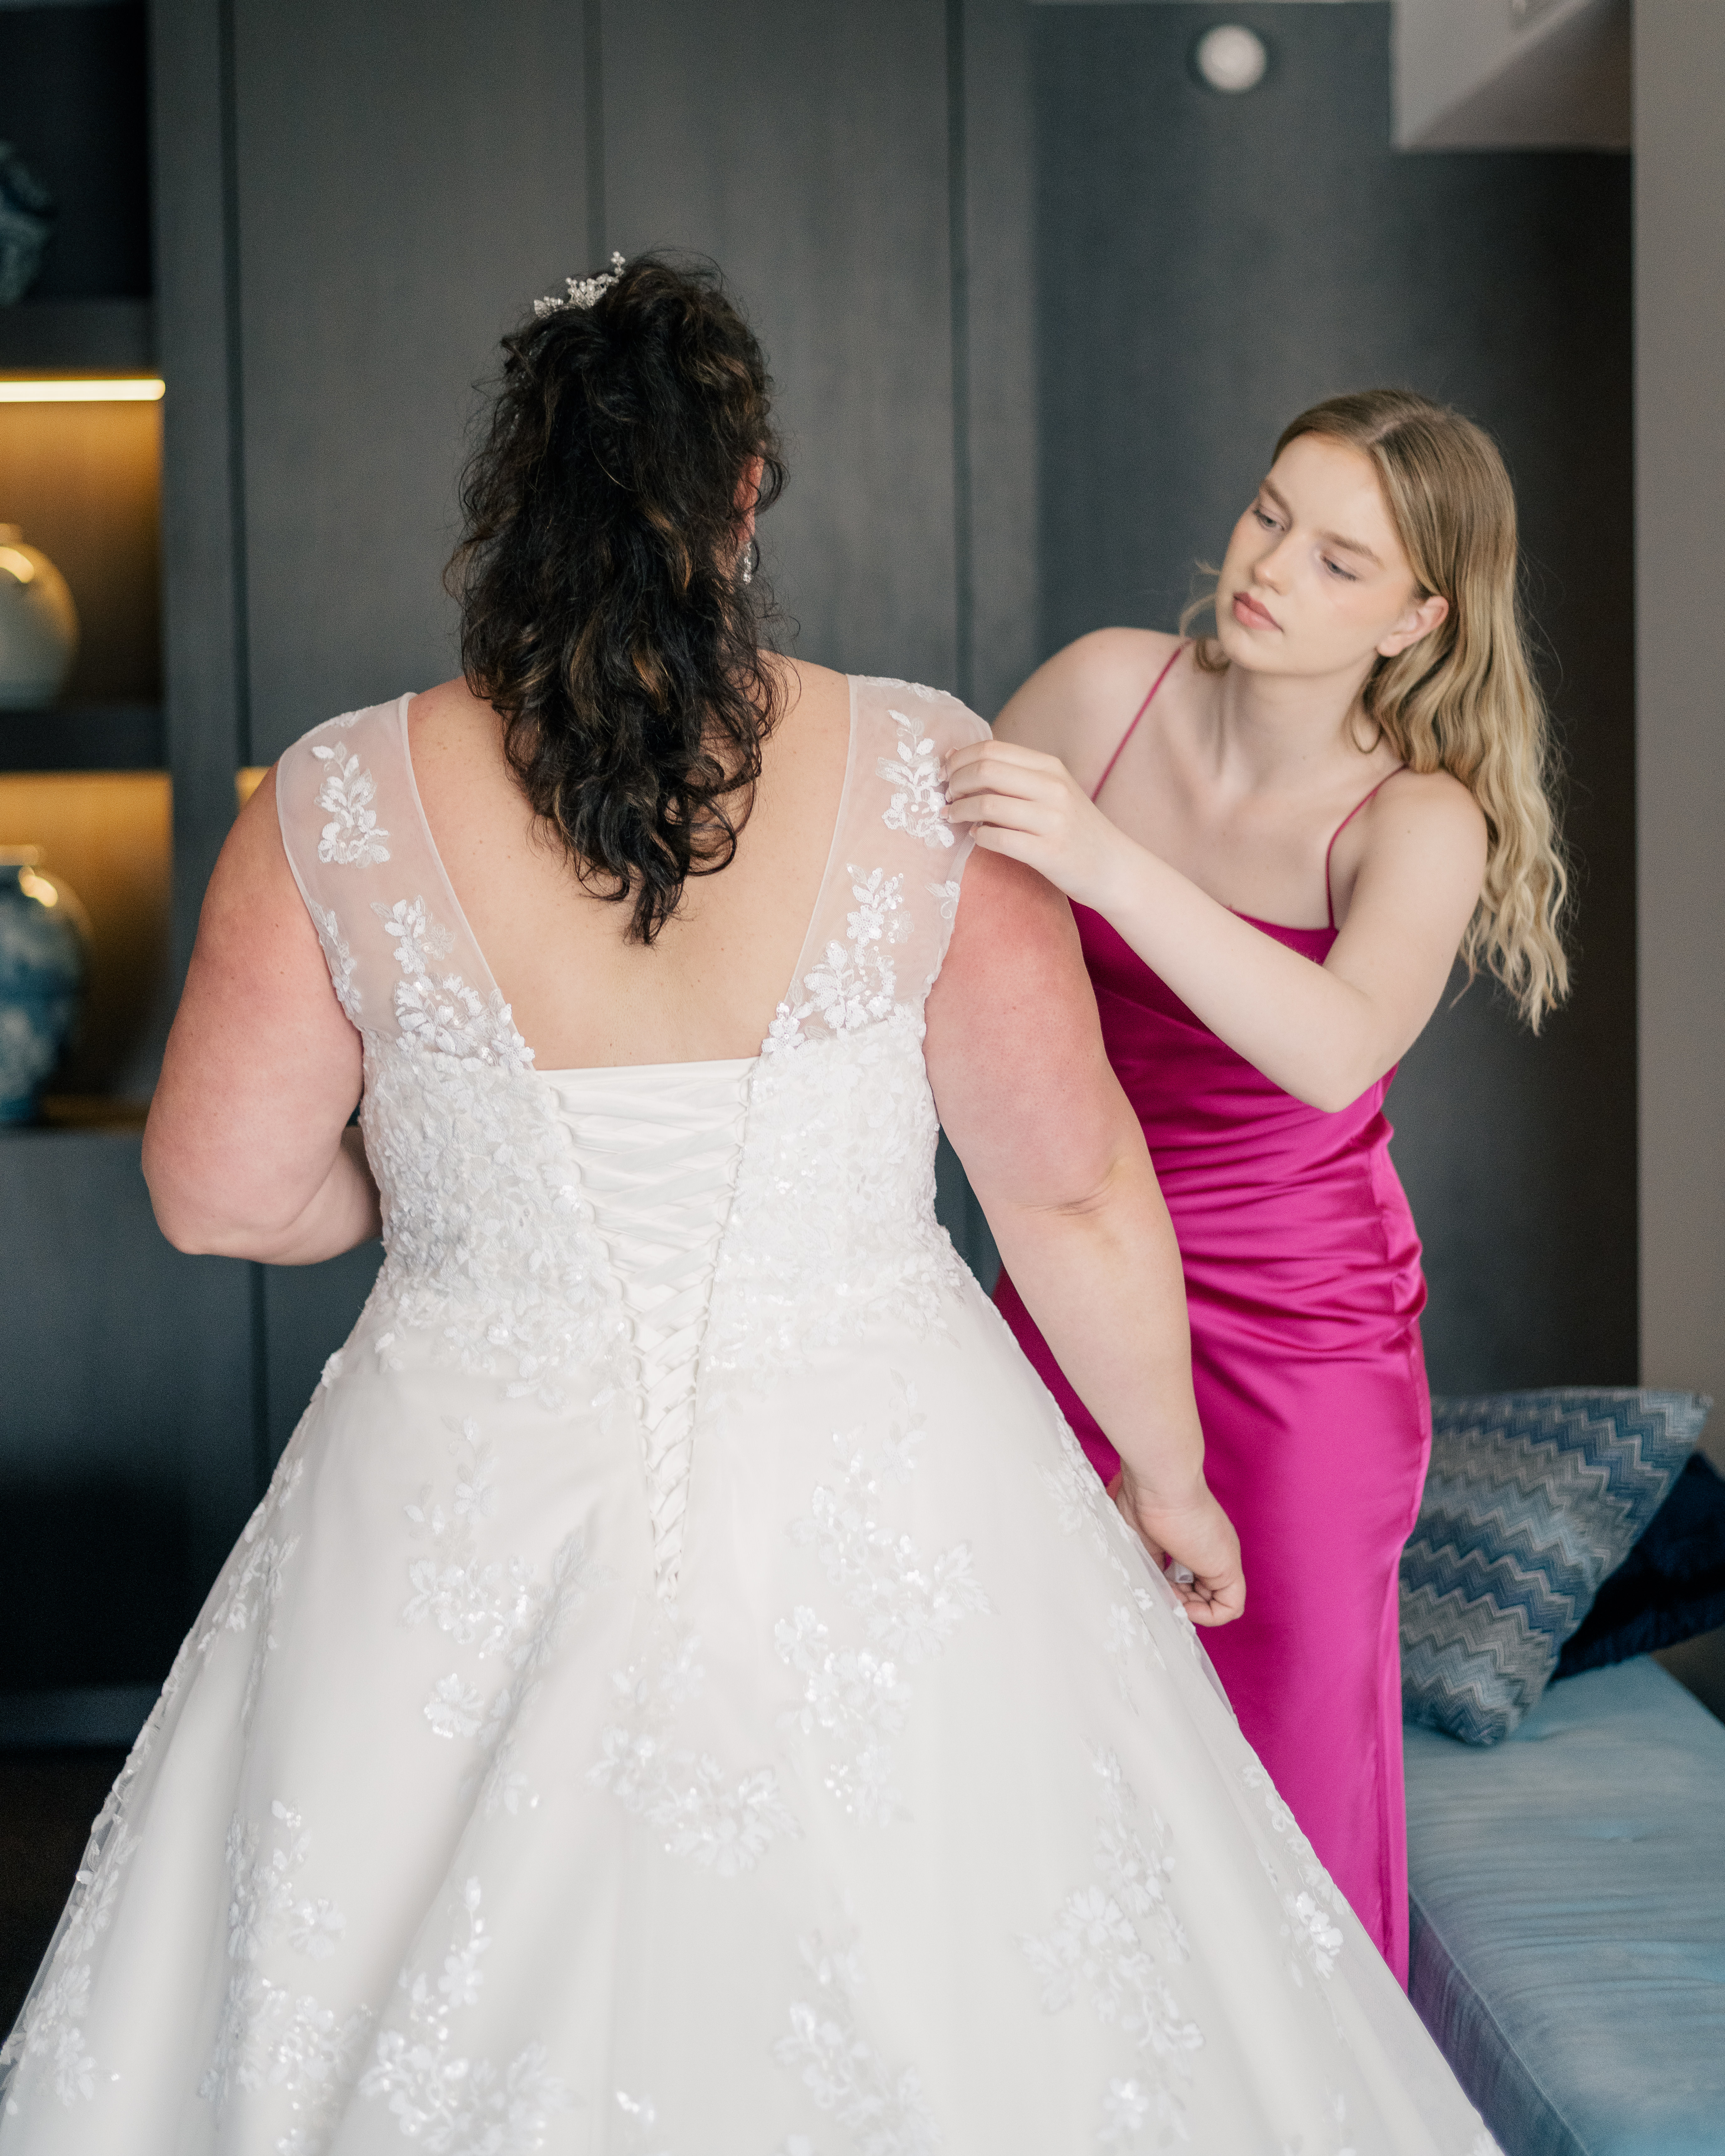 a bride getting ready in her white wedding dress with dark hair whilst her daughter with blond hair and a pink dress helps to her right